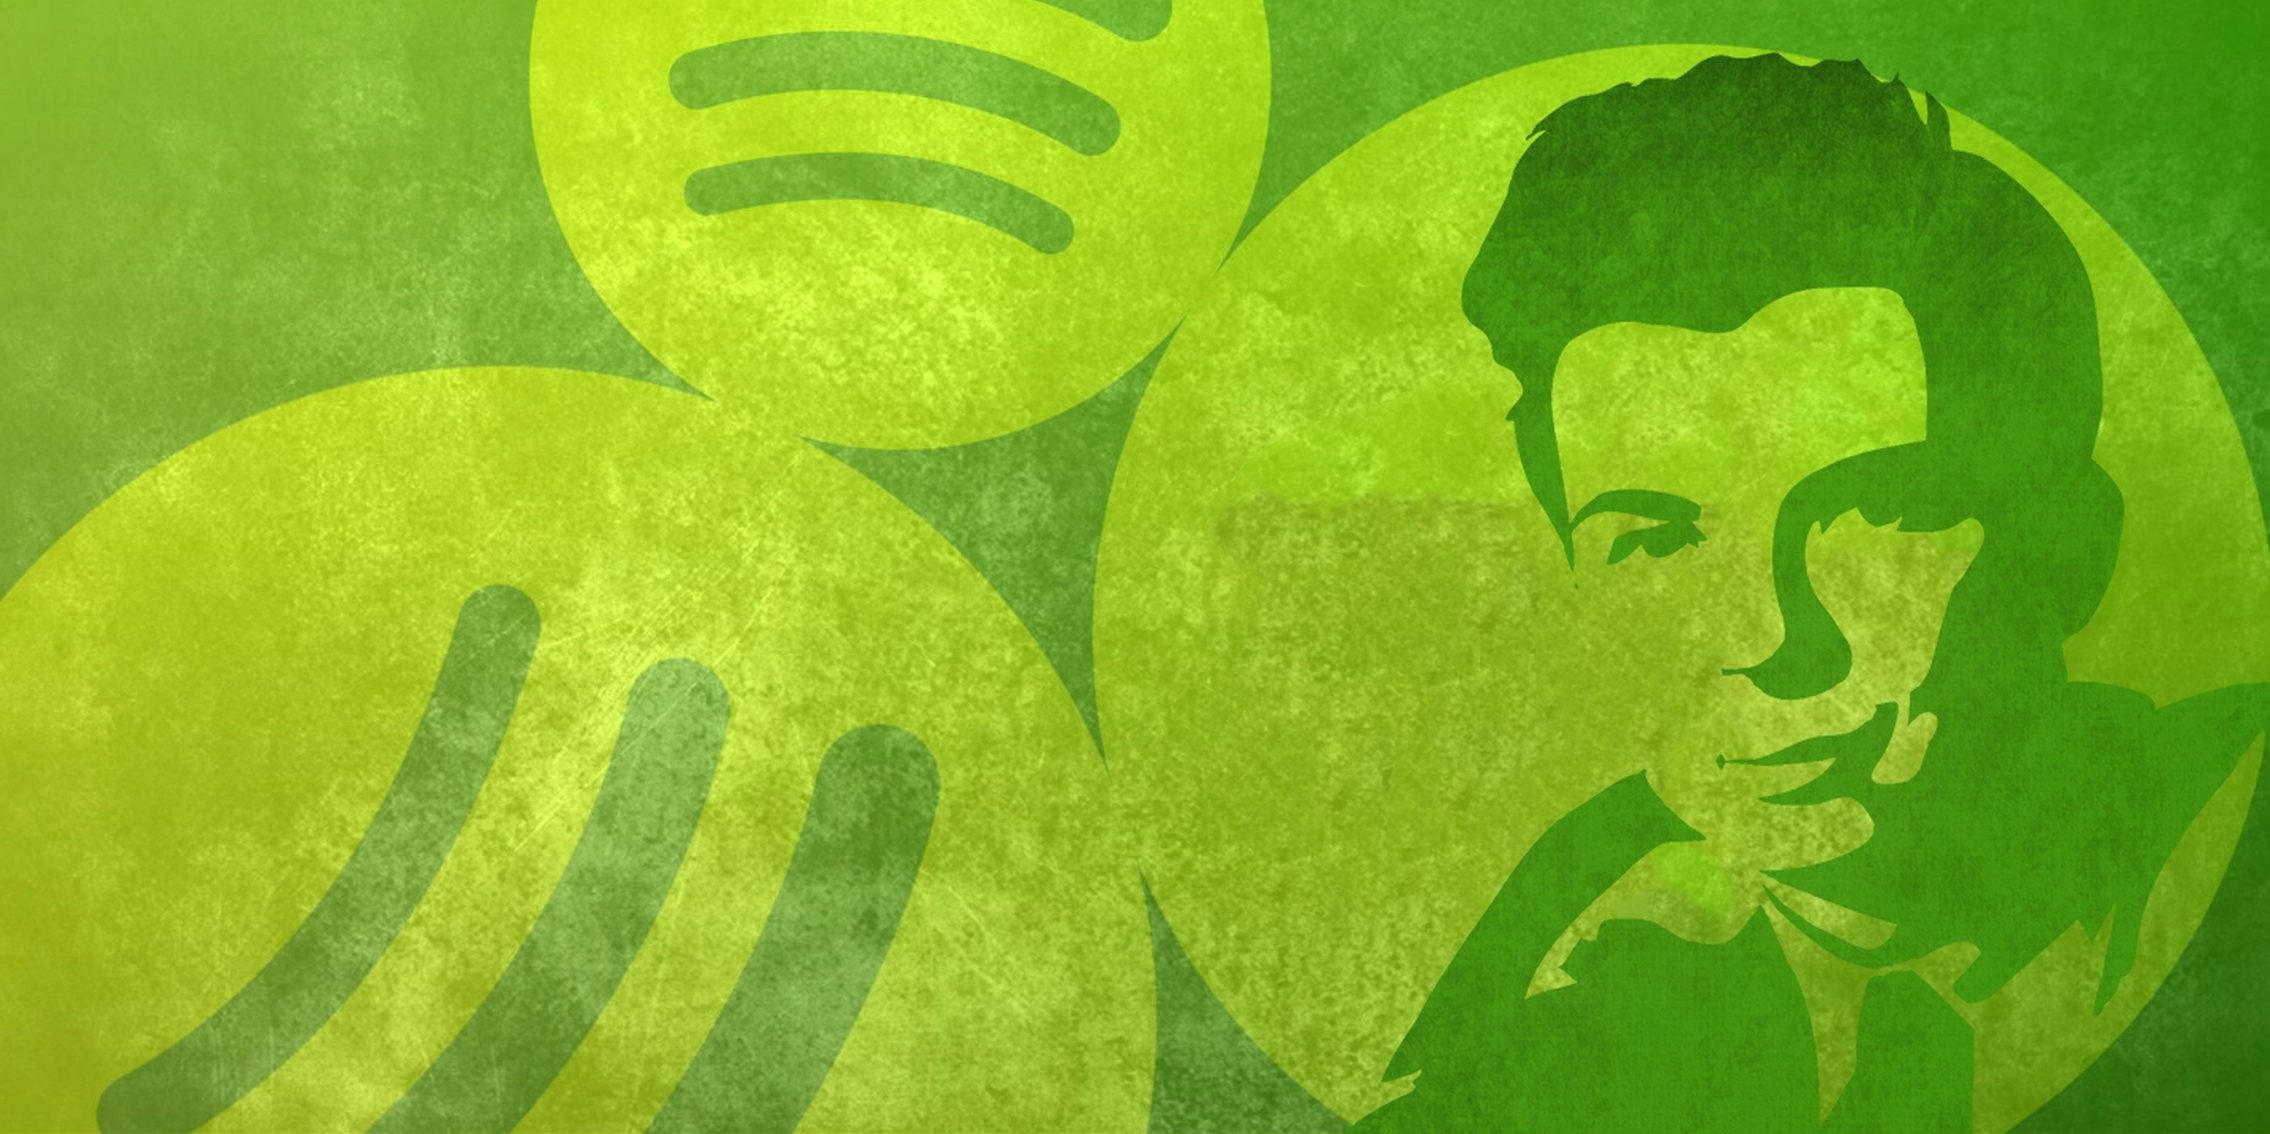 Spotify will gladly Rickroll you because nothing is sacred